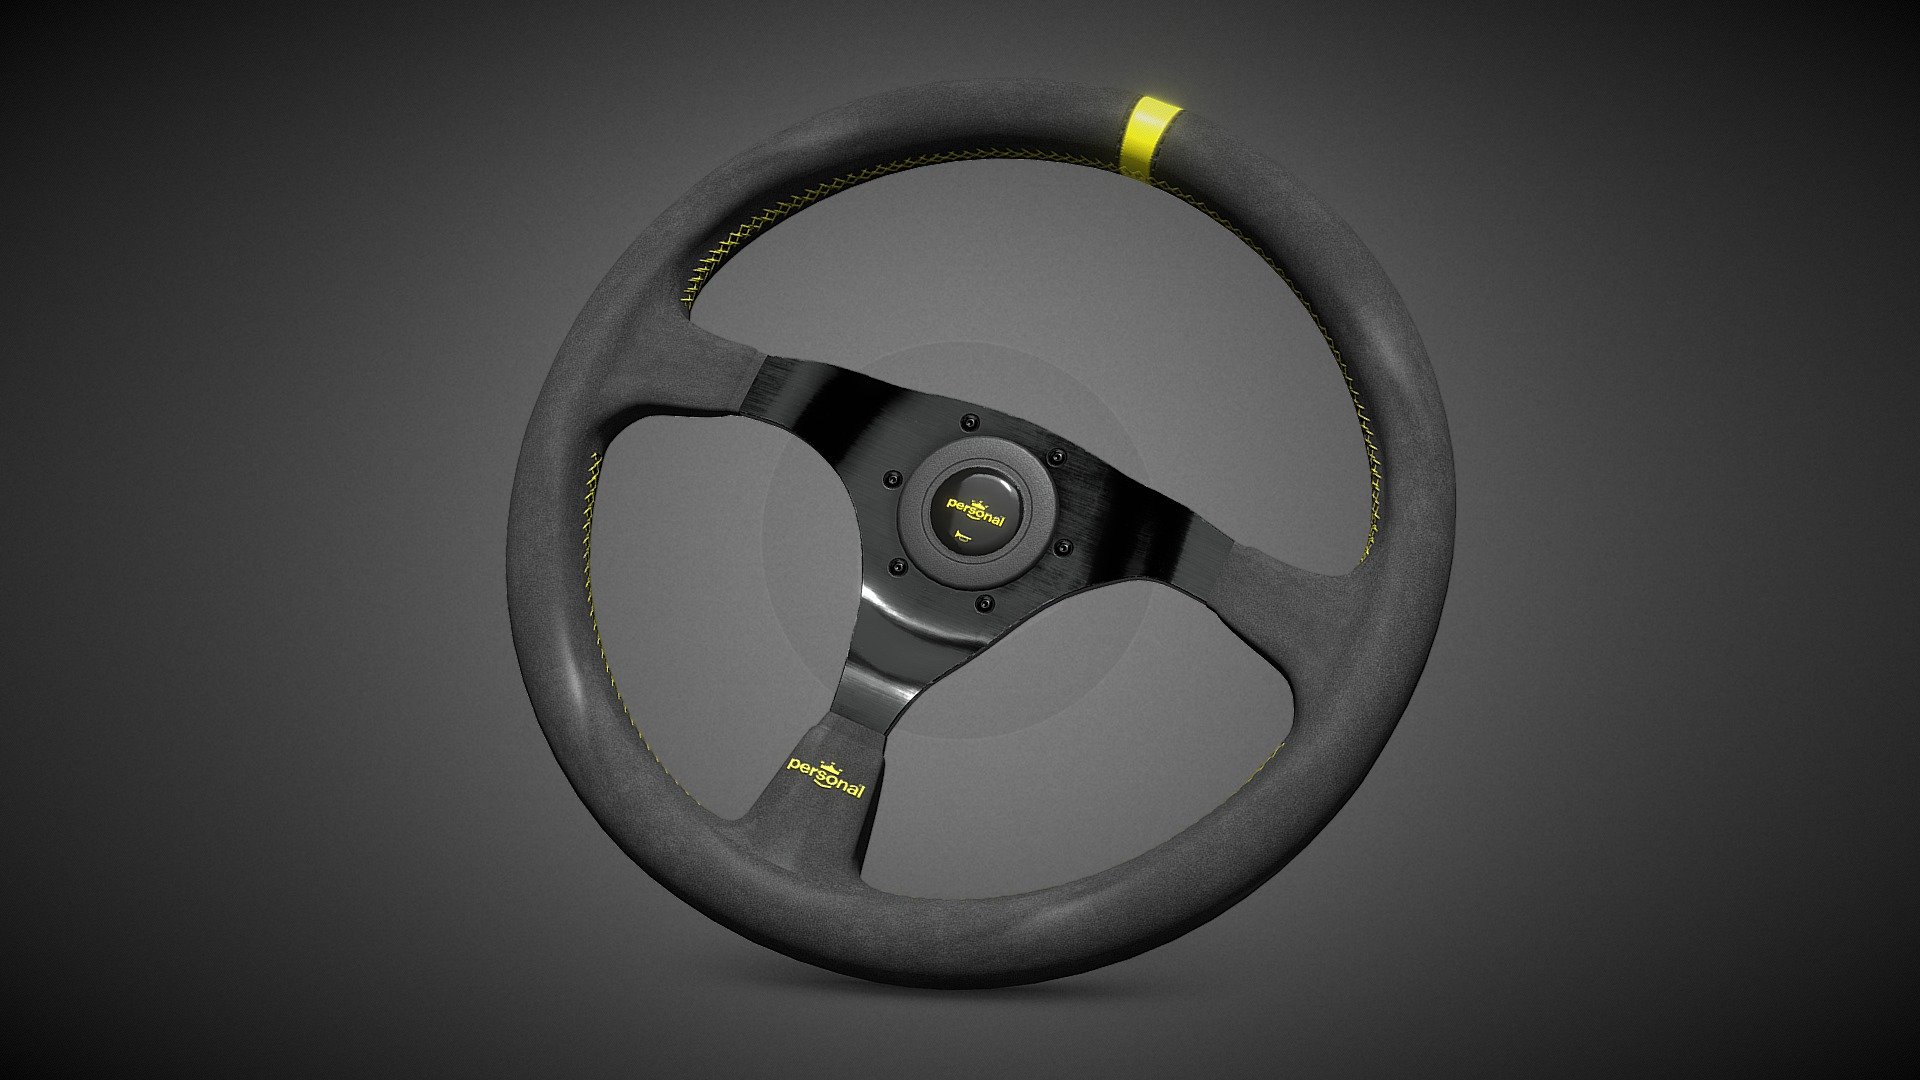 Nardi-Personal Trophy racing steering wheel

PBR Metallic roughness
Modelled in Blender
Textured in Substance Painter

Feedback is of course welcome - Nardi-Personal Racing Steering Wheel - 3D model by Jordan (@Evailion) 3d model